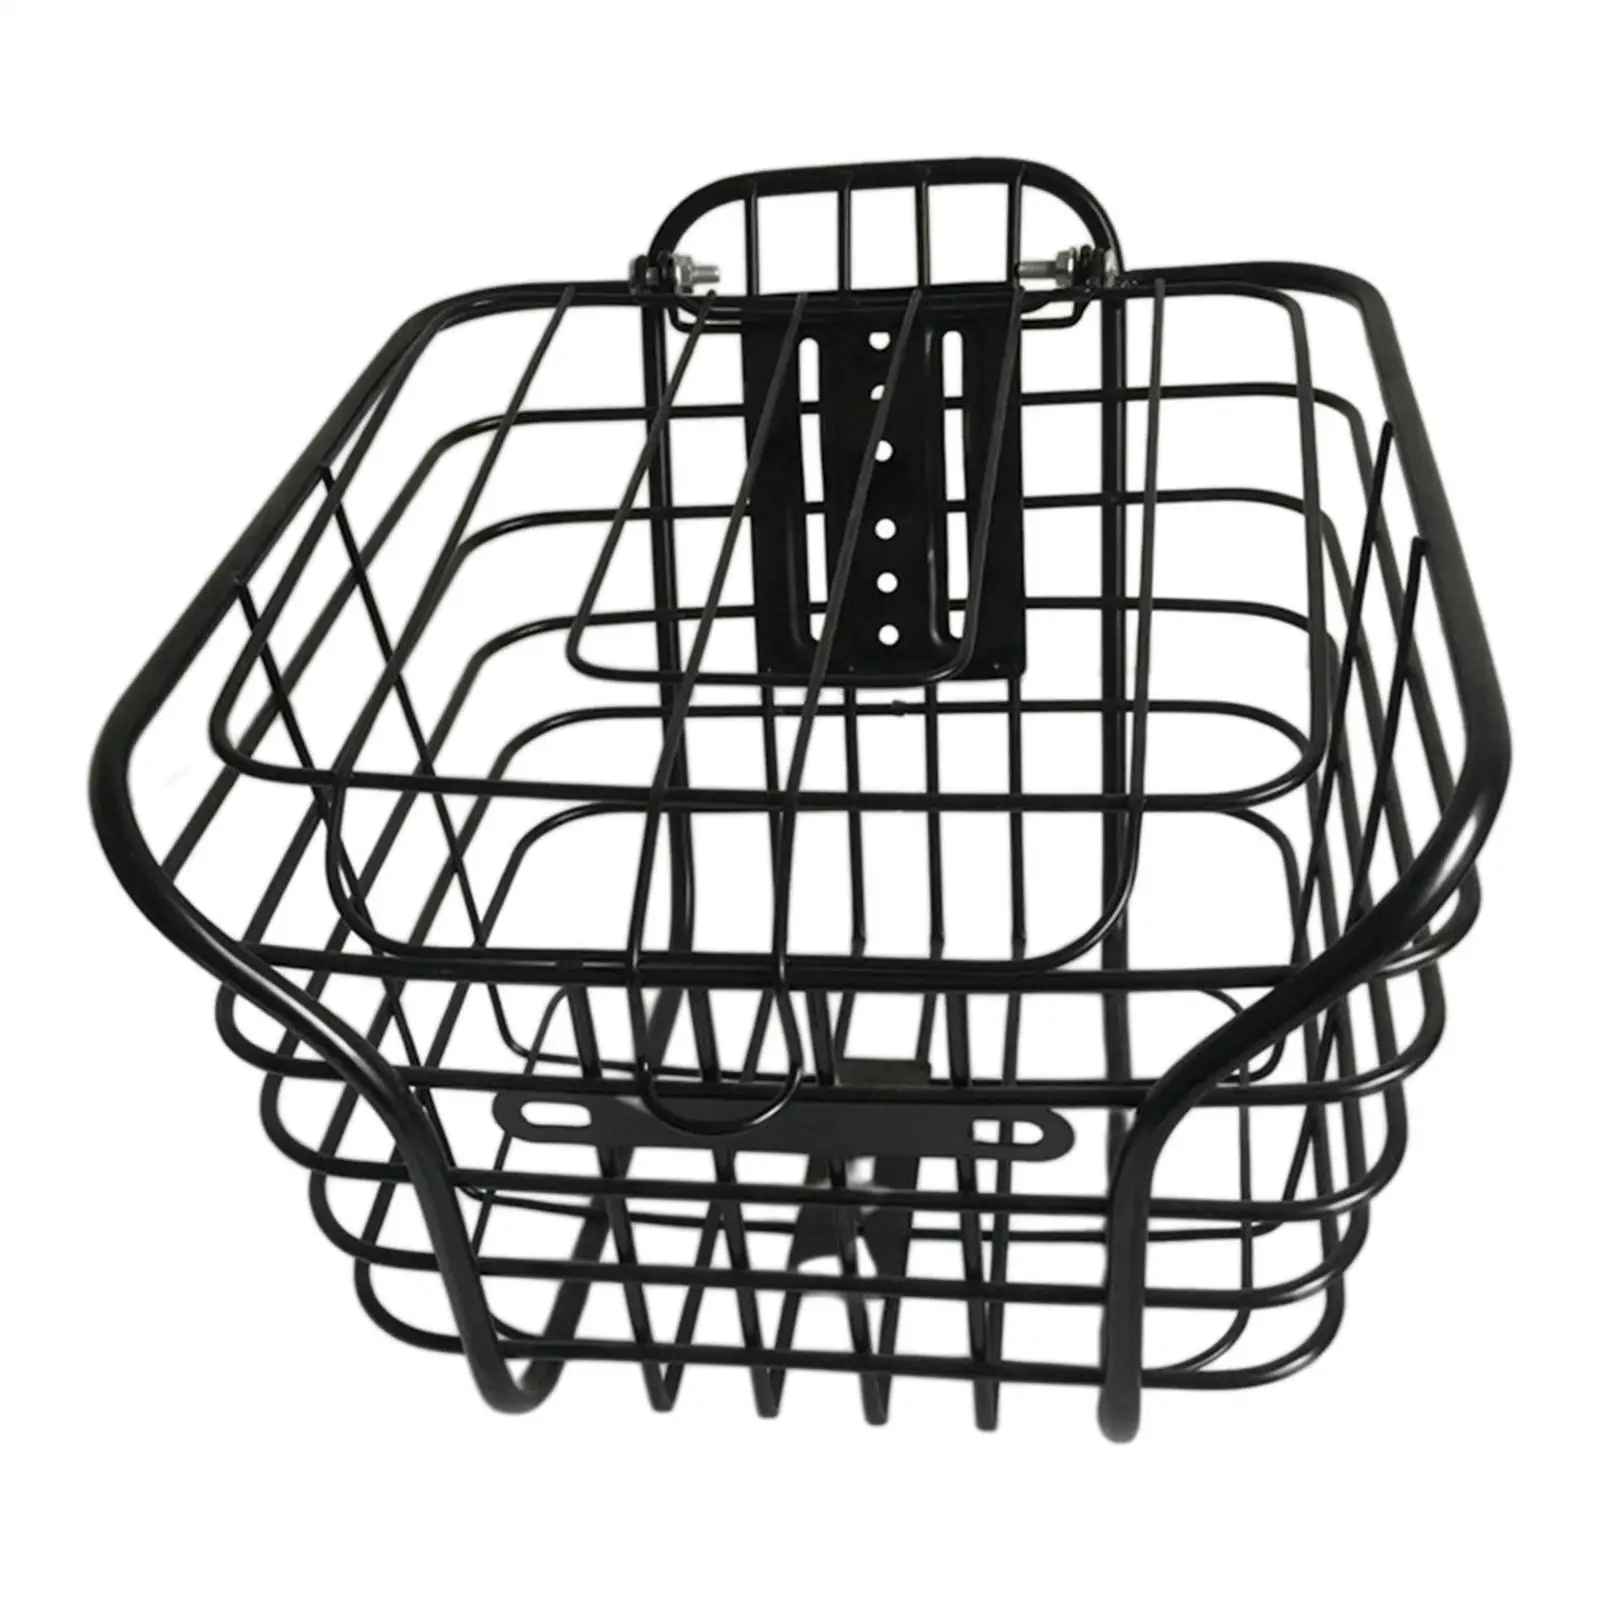 Iron Bicycle Storage Basket Holder for Scooter Cycling Durable Universal